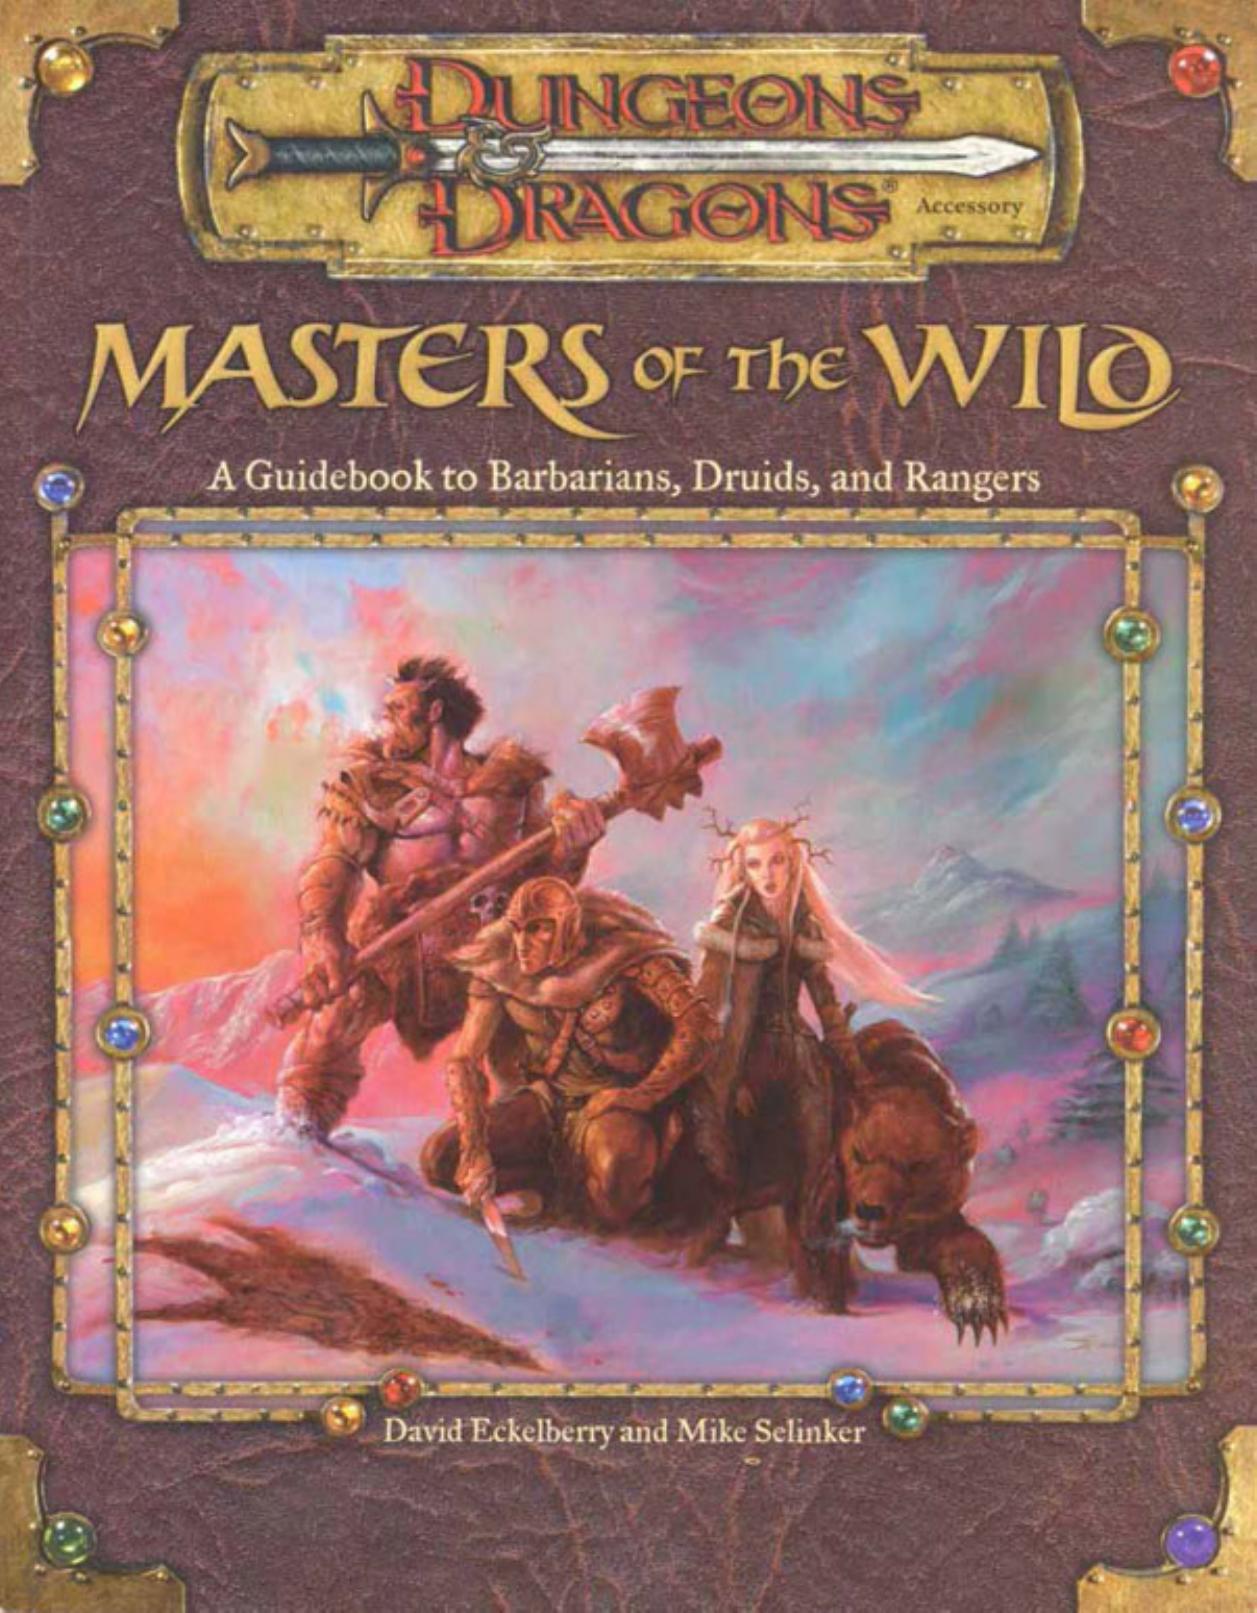 Masters of the Wild: A Guidebook to Barbarians, Druids, and Rangers